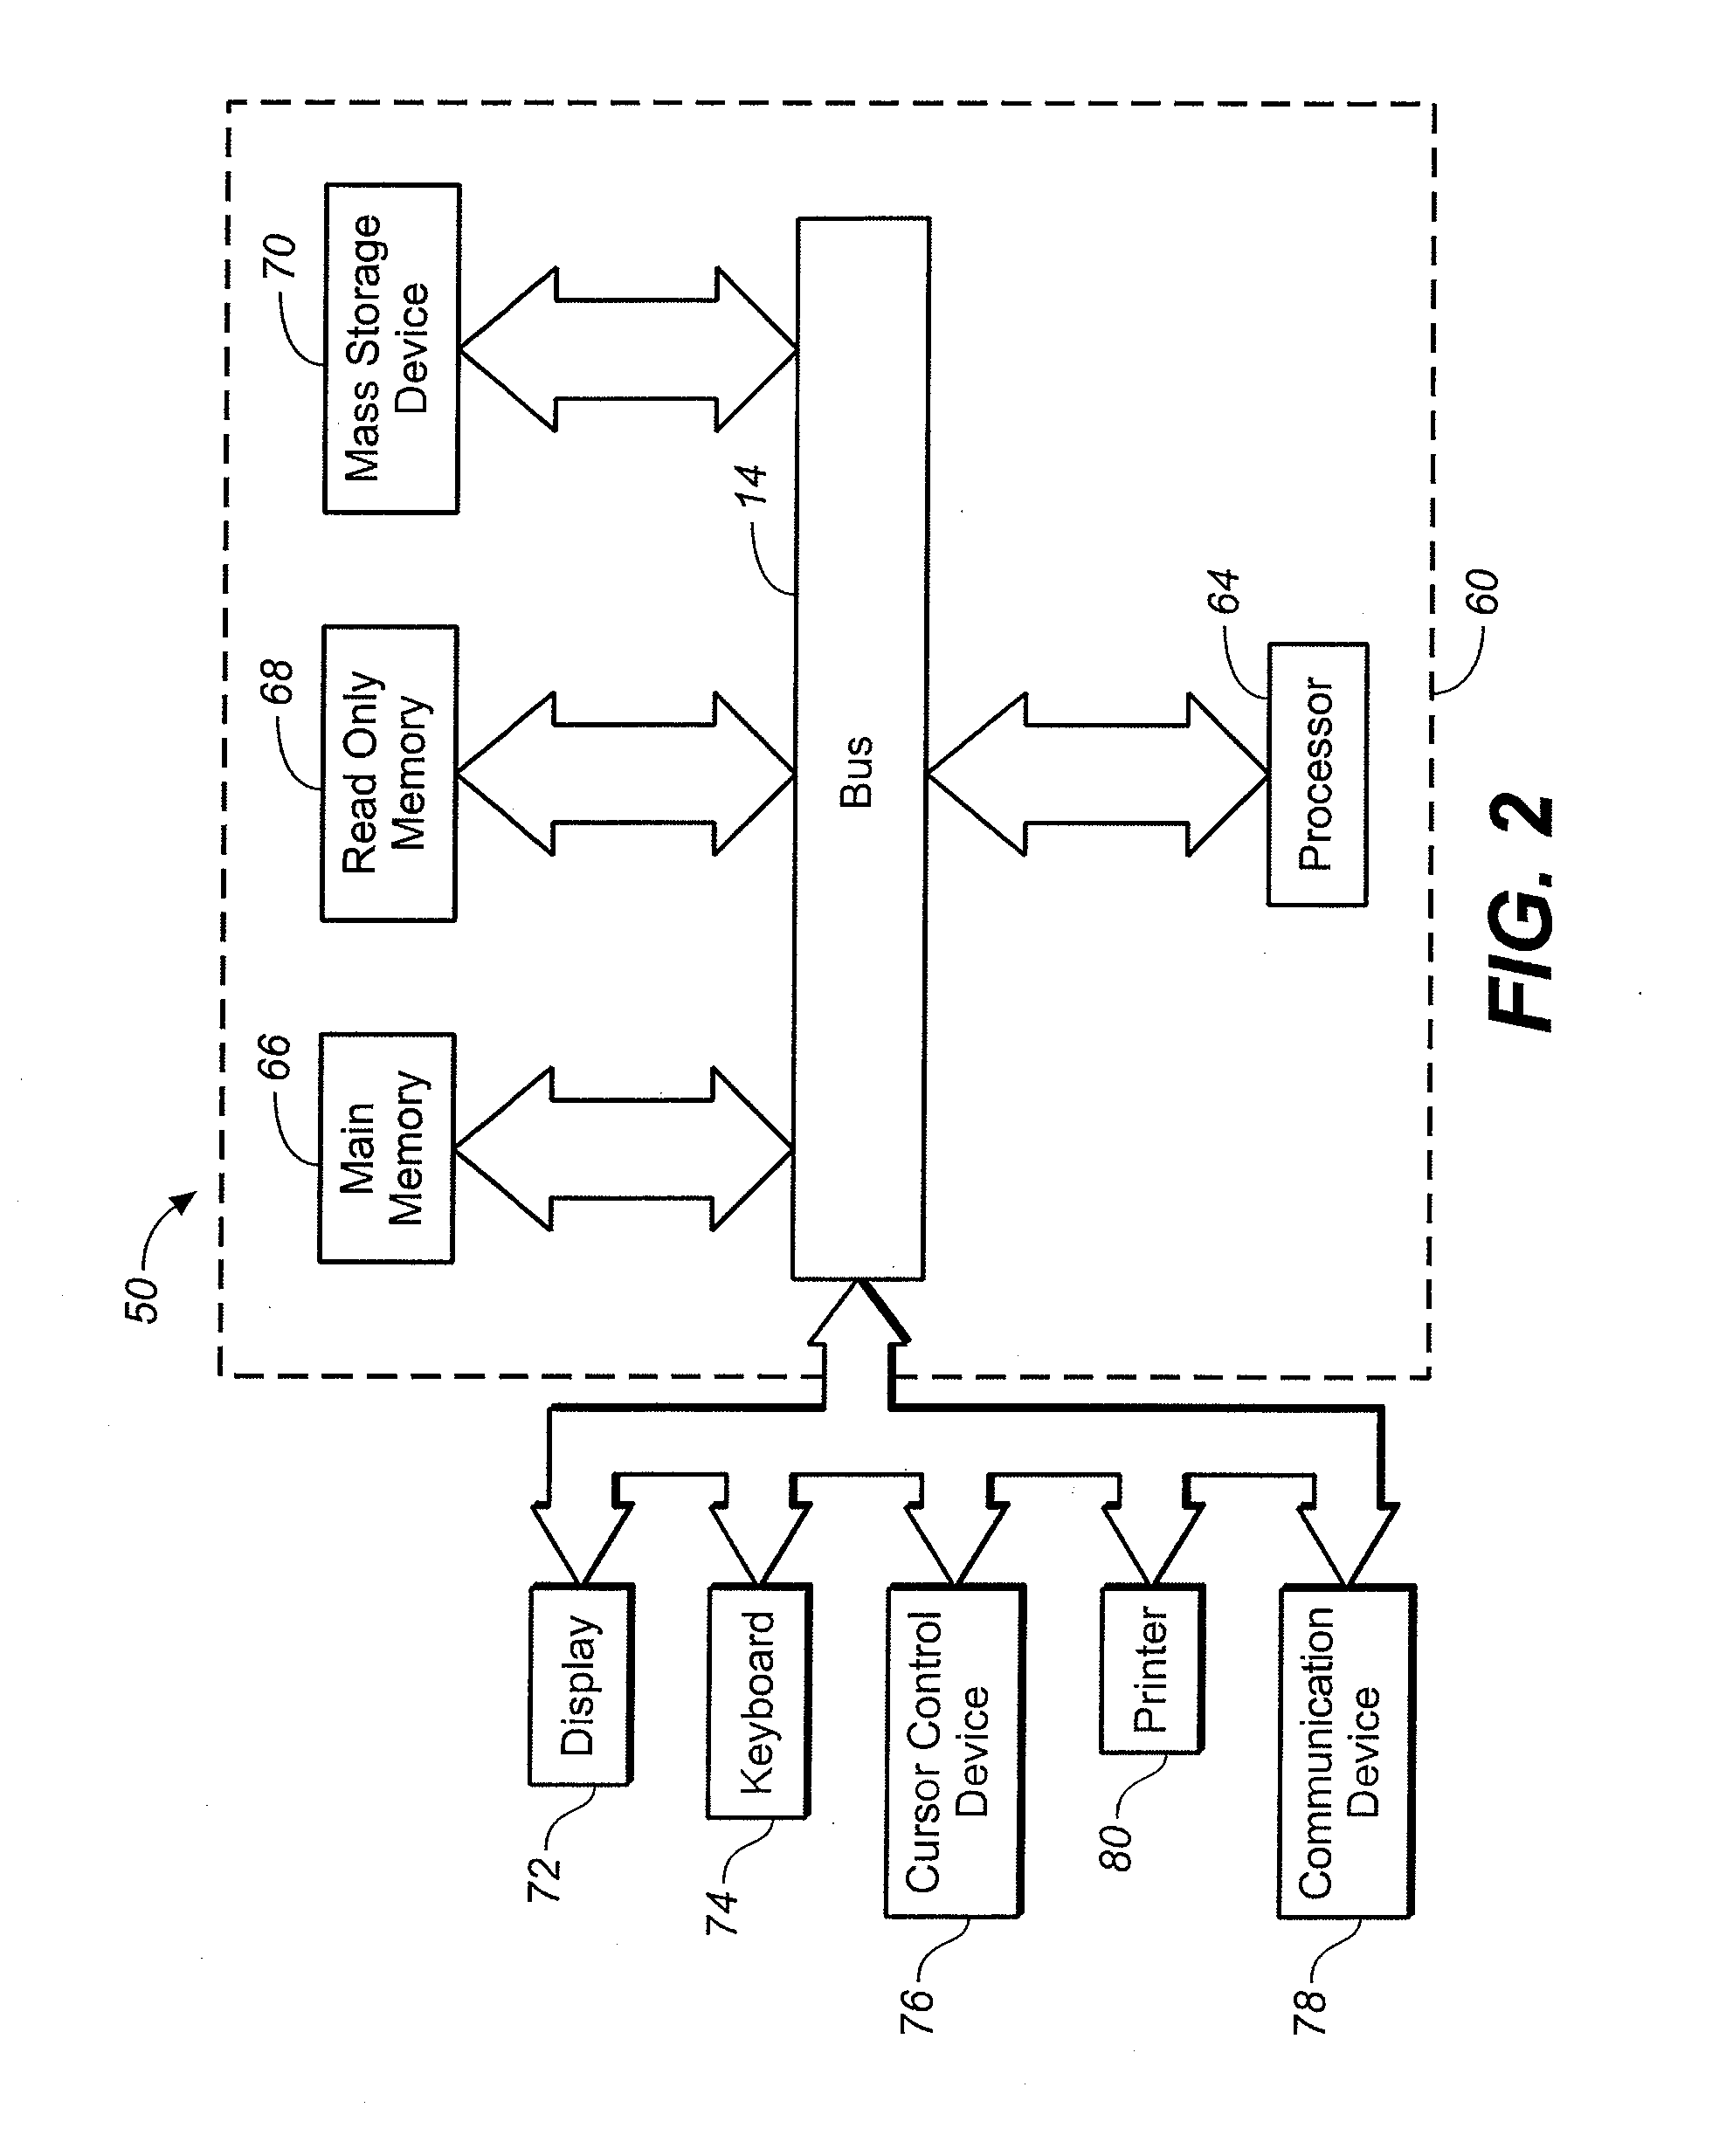 Message-bus-based advanced meter information system with applications for cleaning, estimating and validating meter data